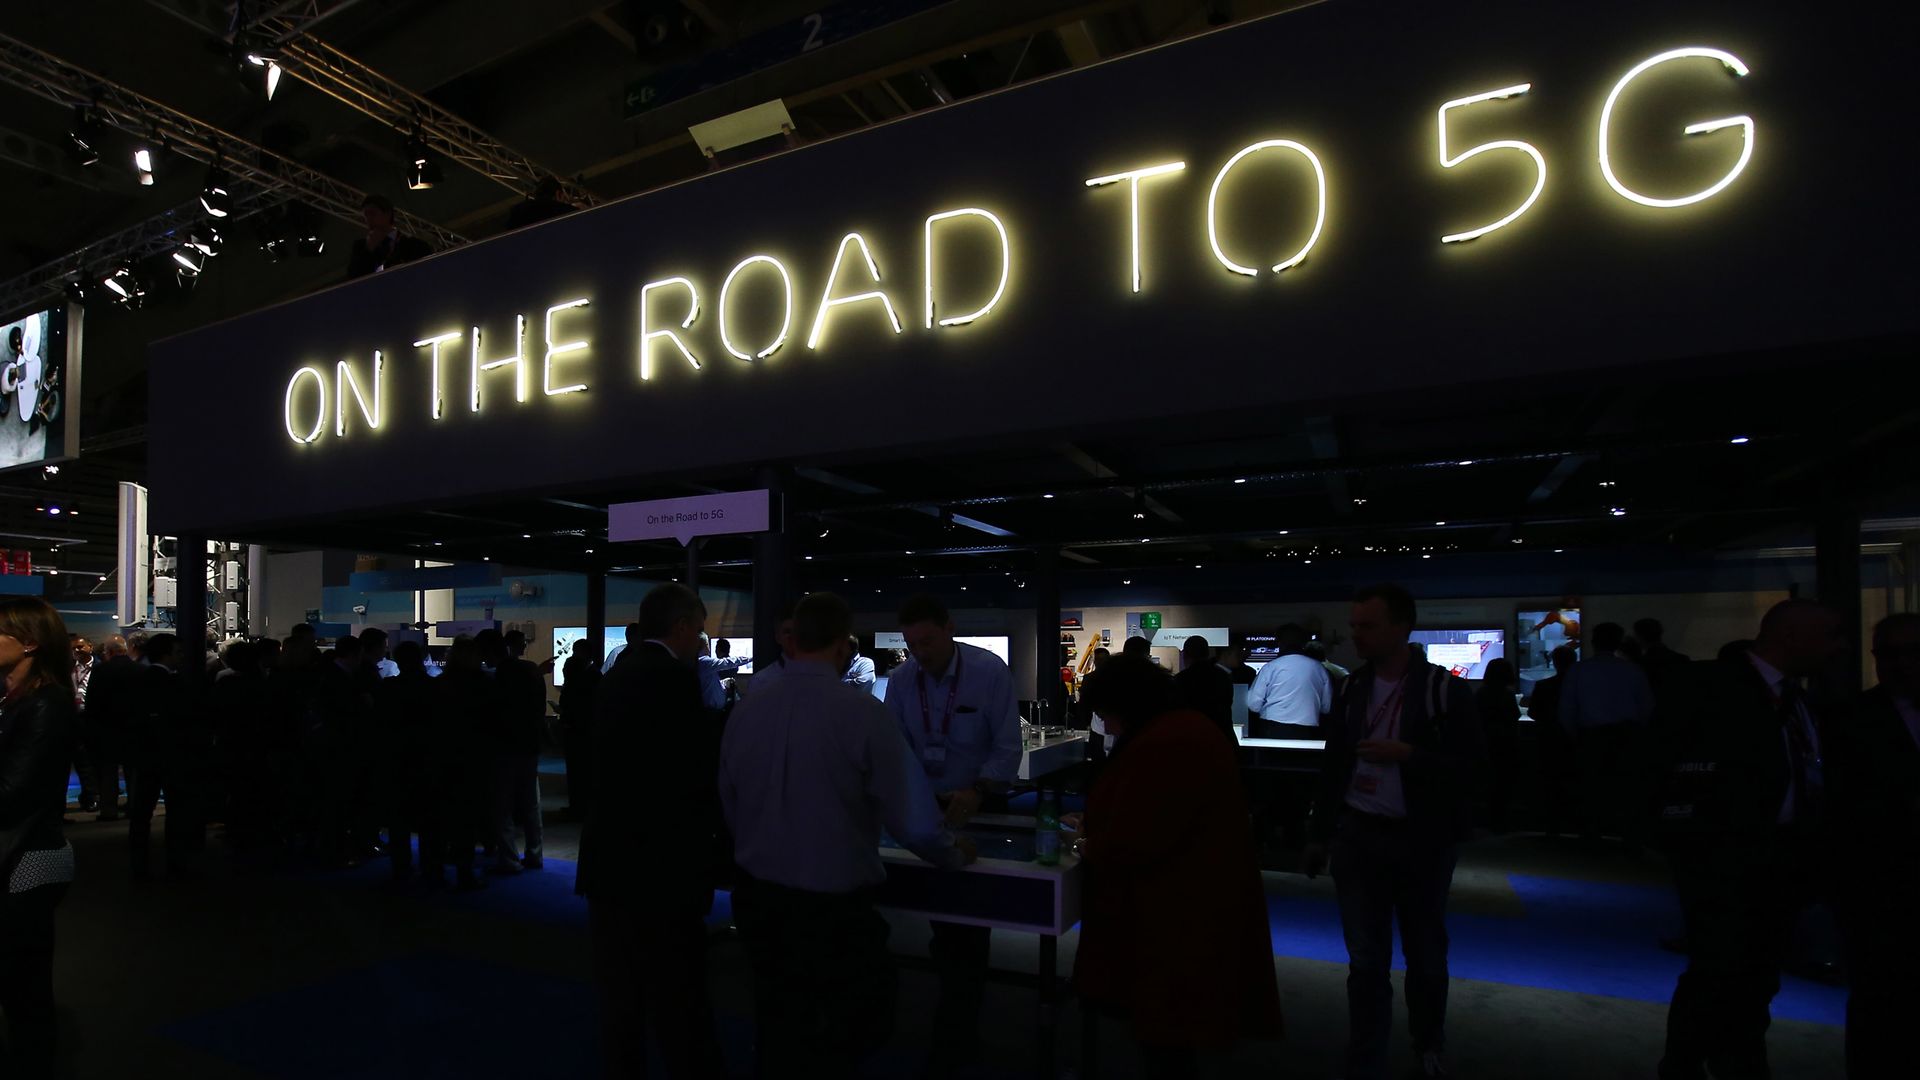 A neon sign at a conference reads "On The Road To 5G"